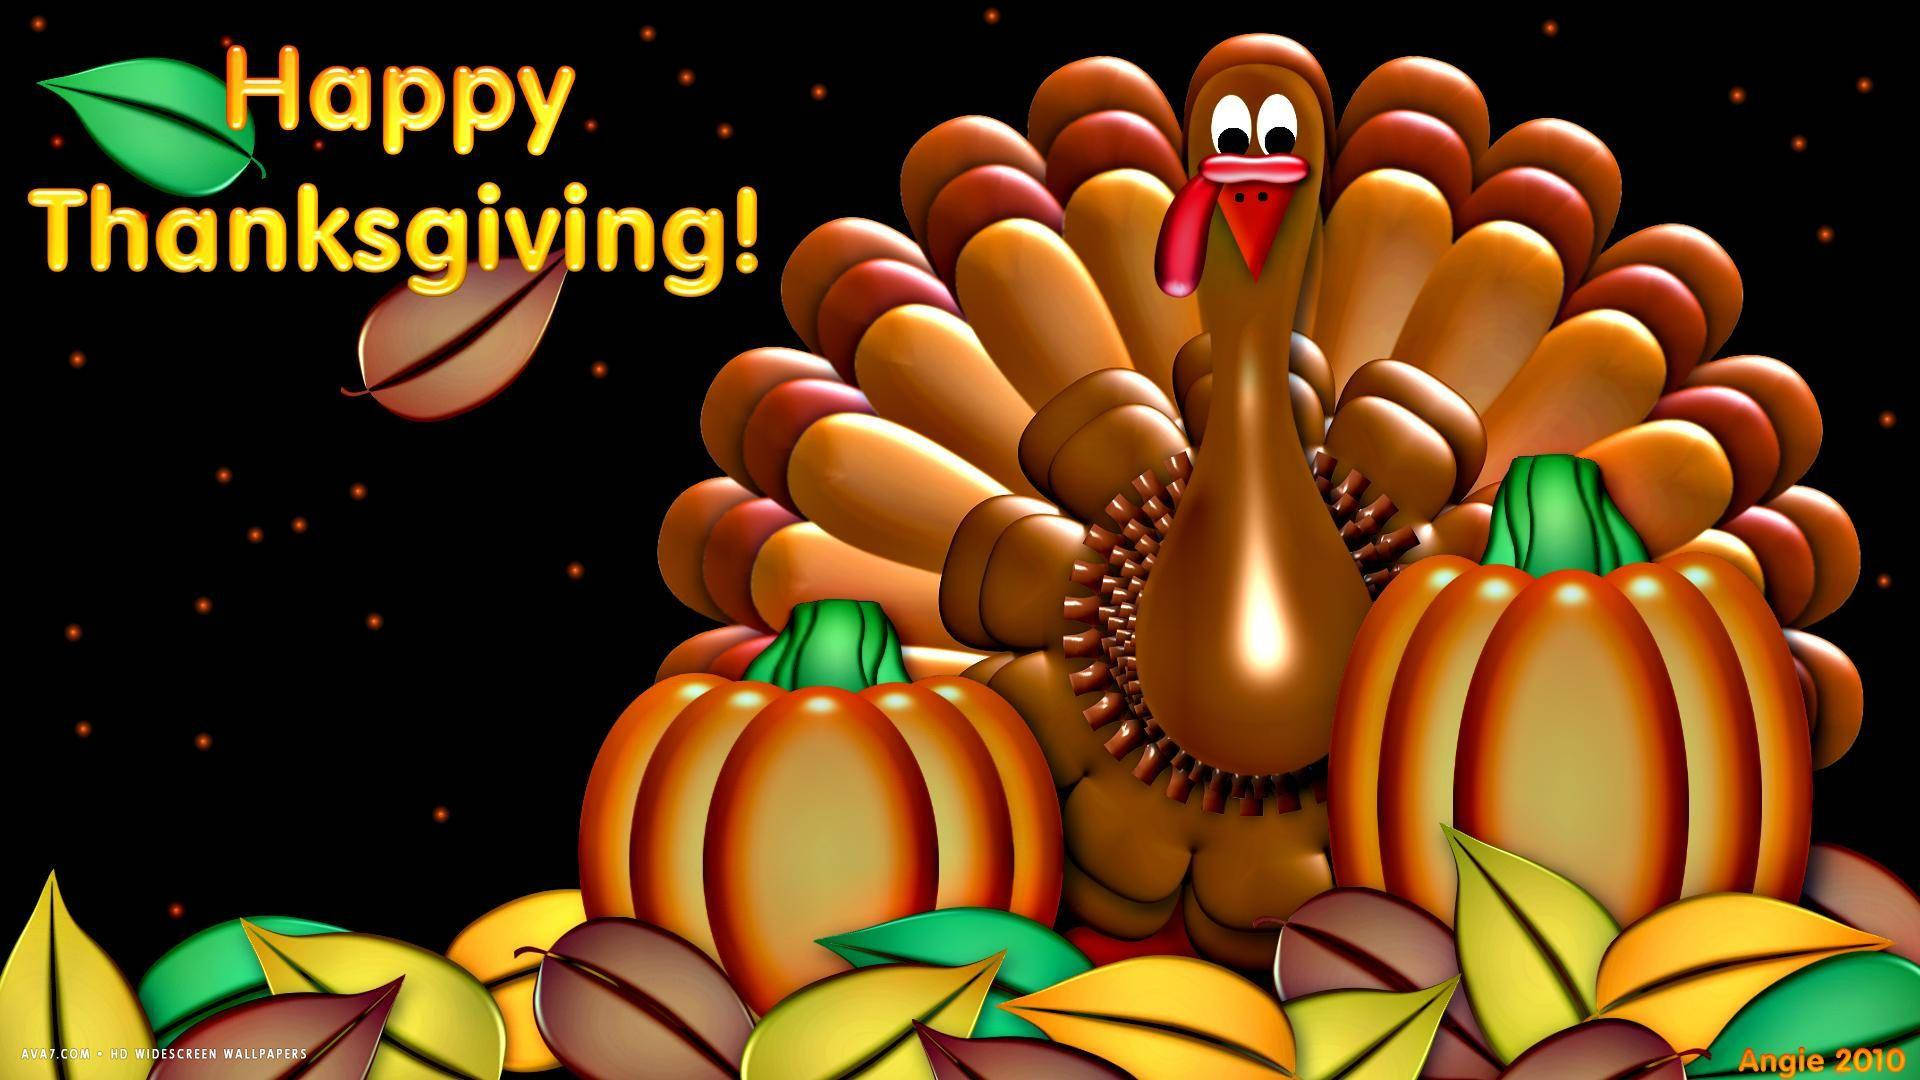 Let's Give Thanks For Turkey On Thanksgiving Wallpaper